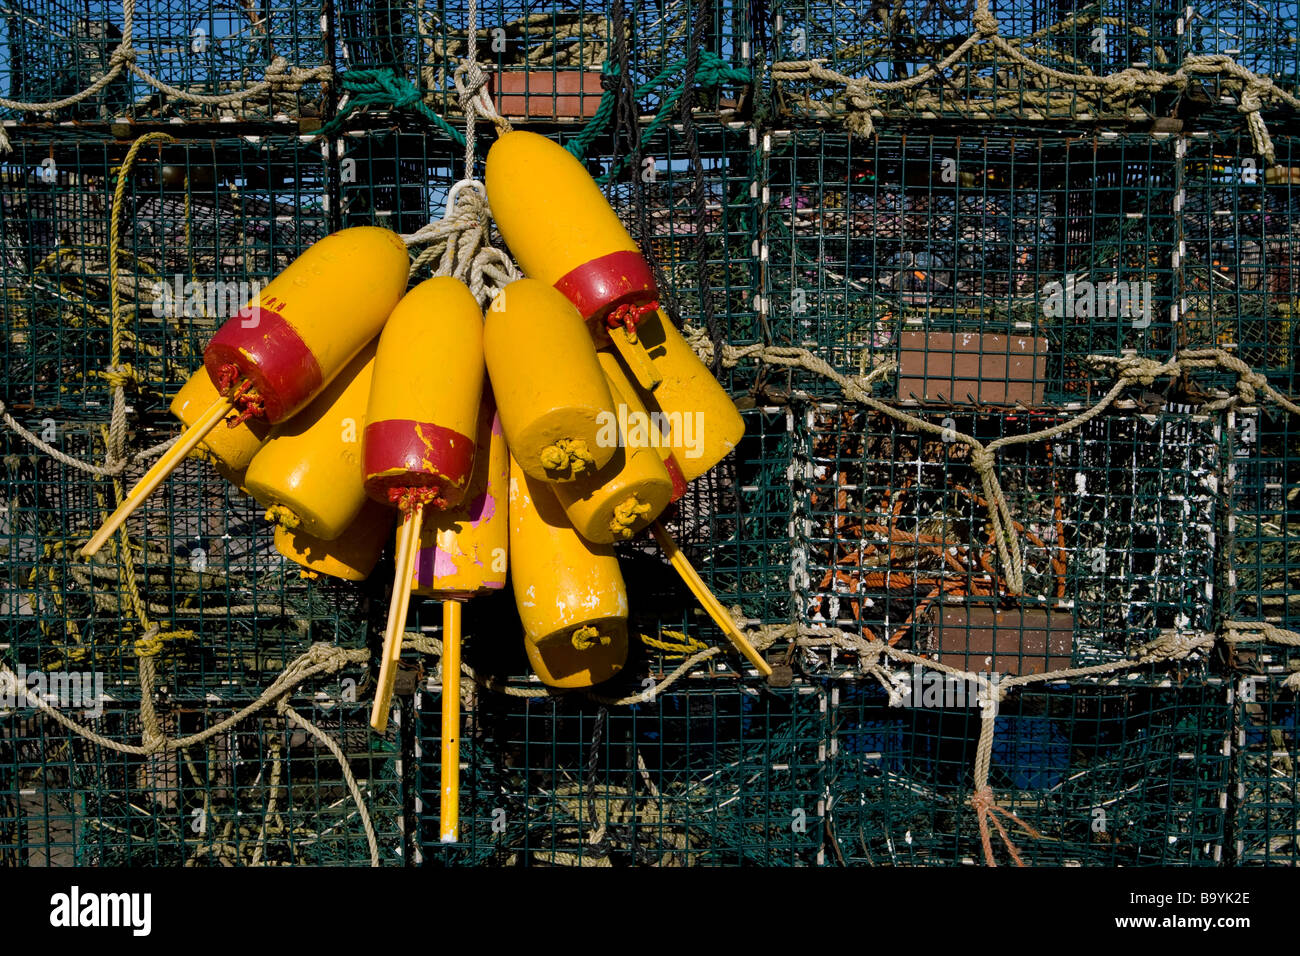 Lobster traps buoys and rope coils on a dock in coastal Maine Stock Photo